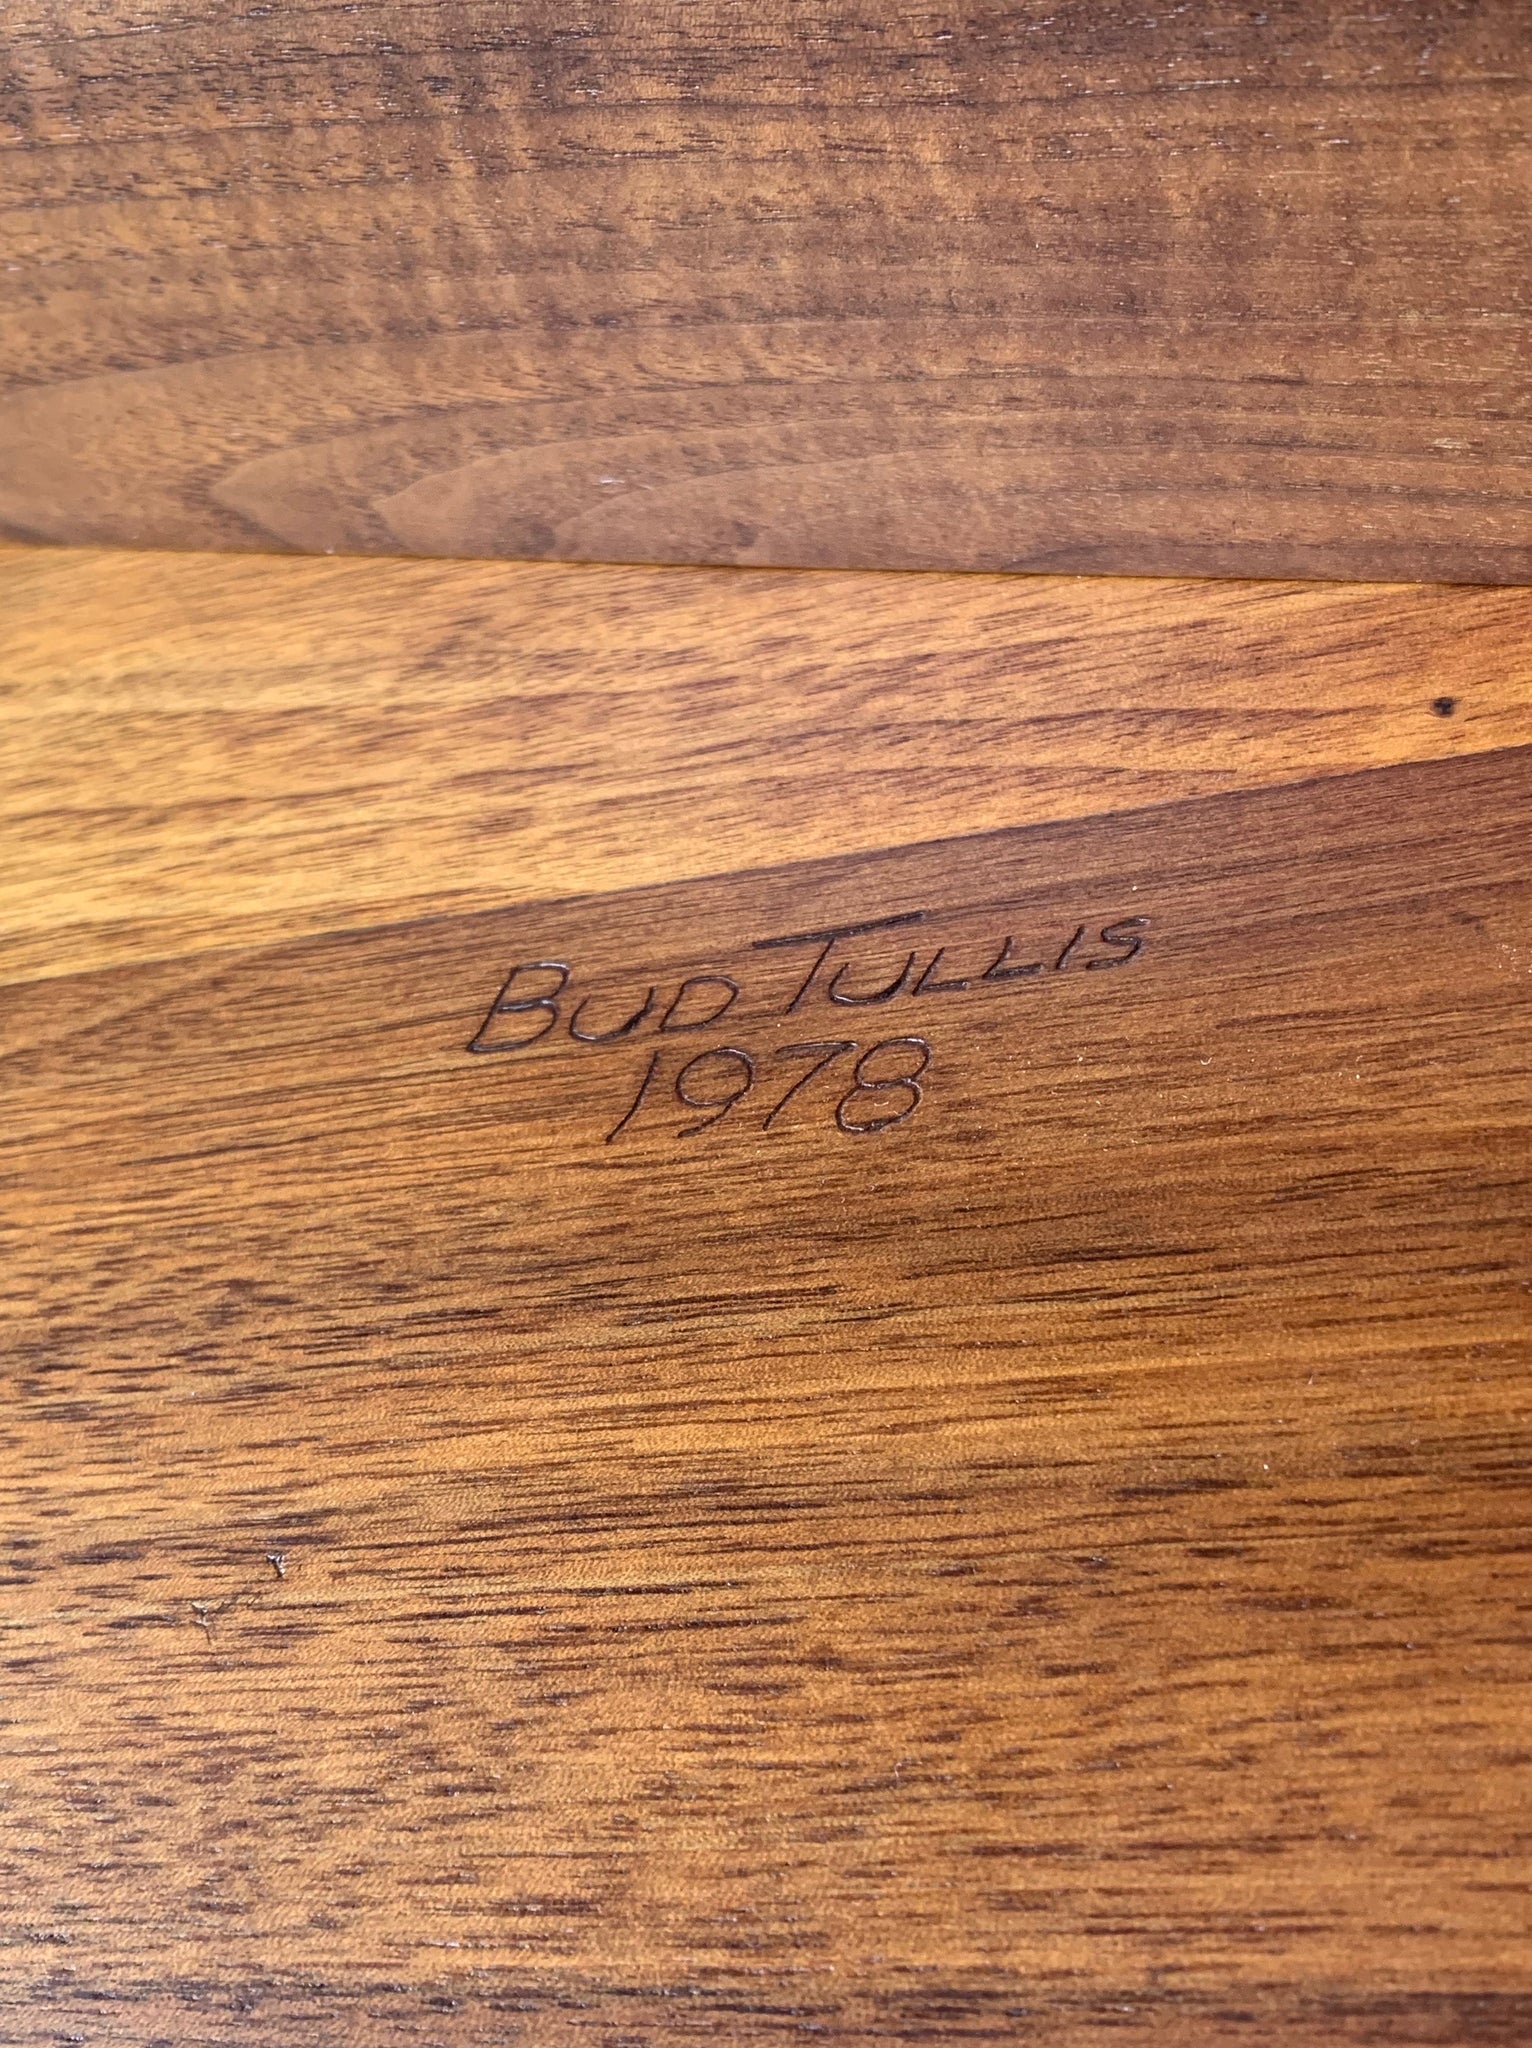 = SOLD = Bud Tullis Handcrafted Coffee Table, 1978